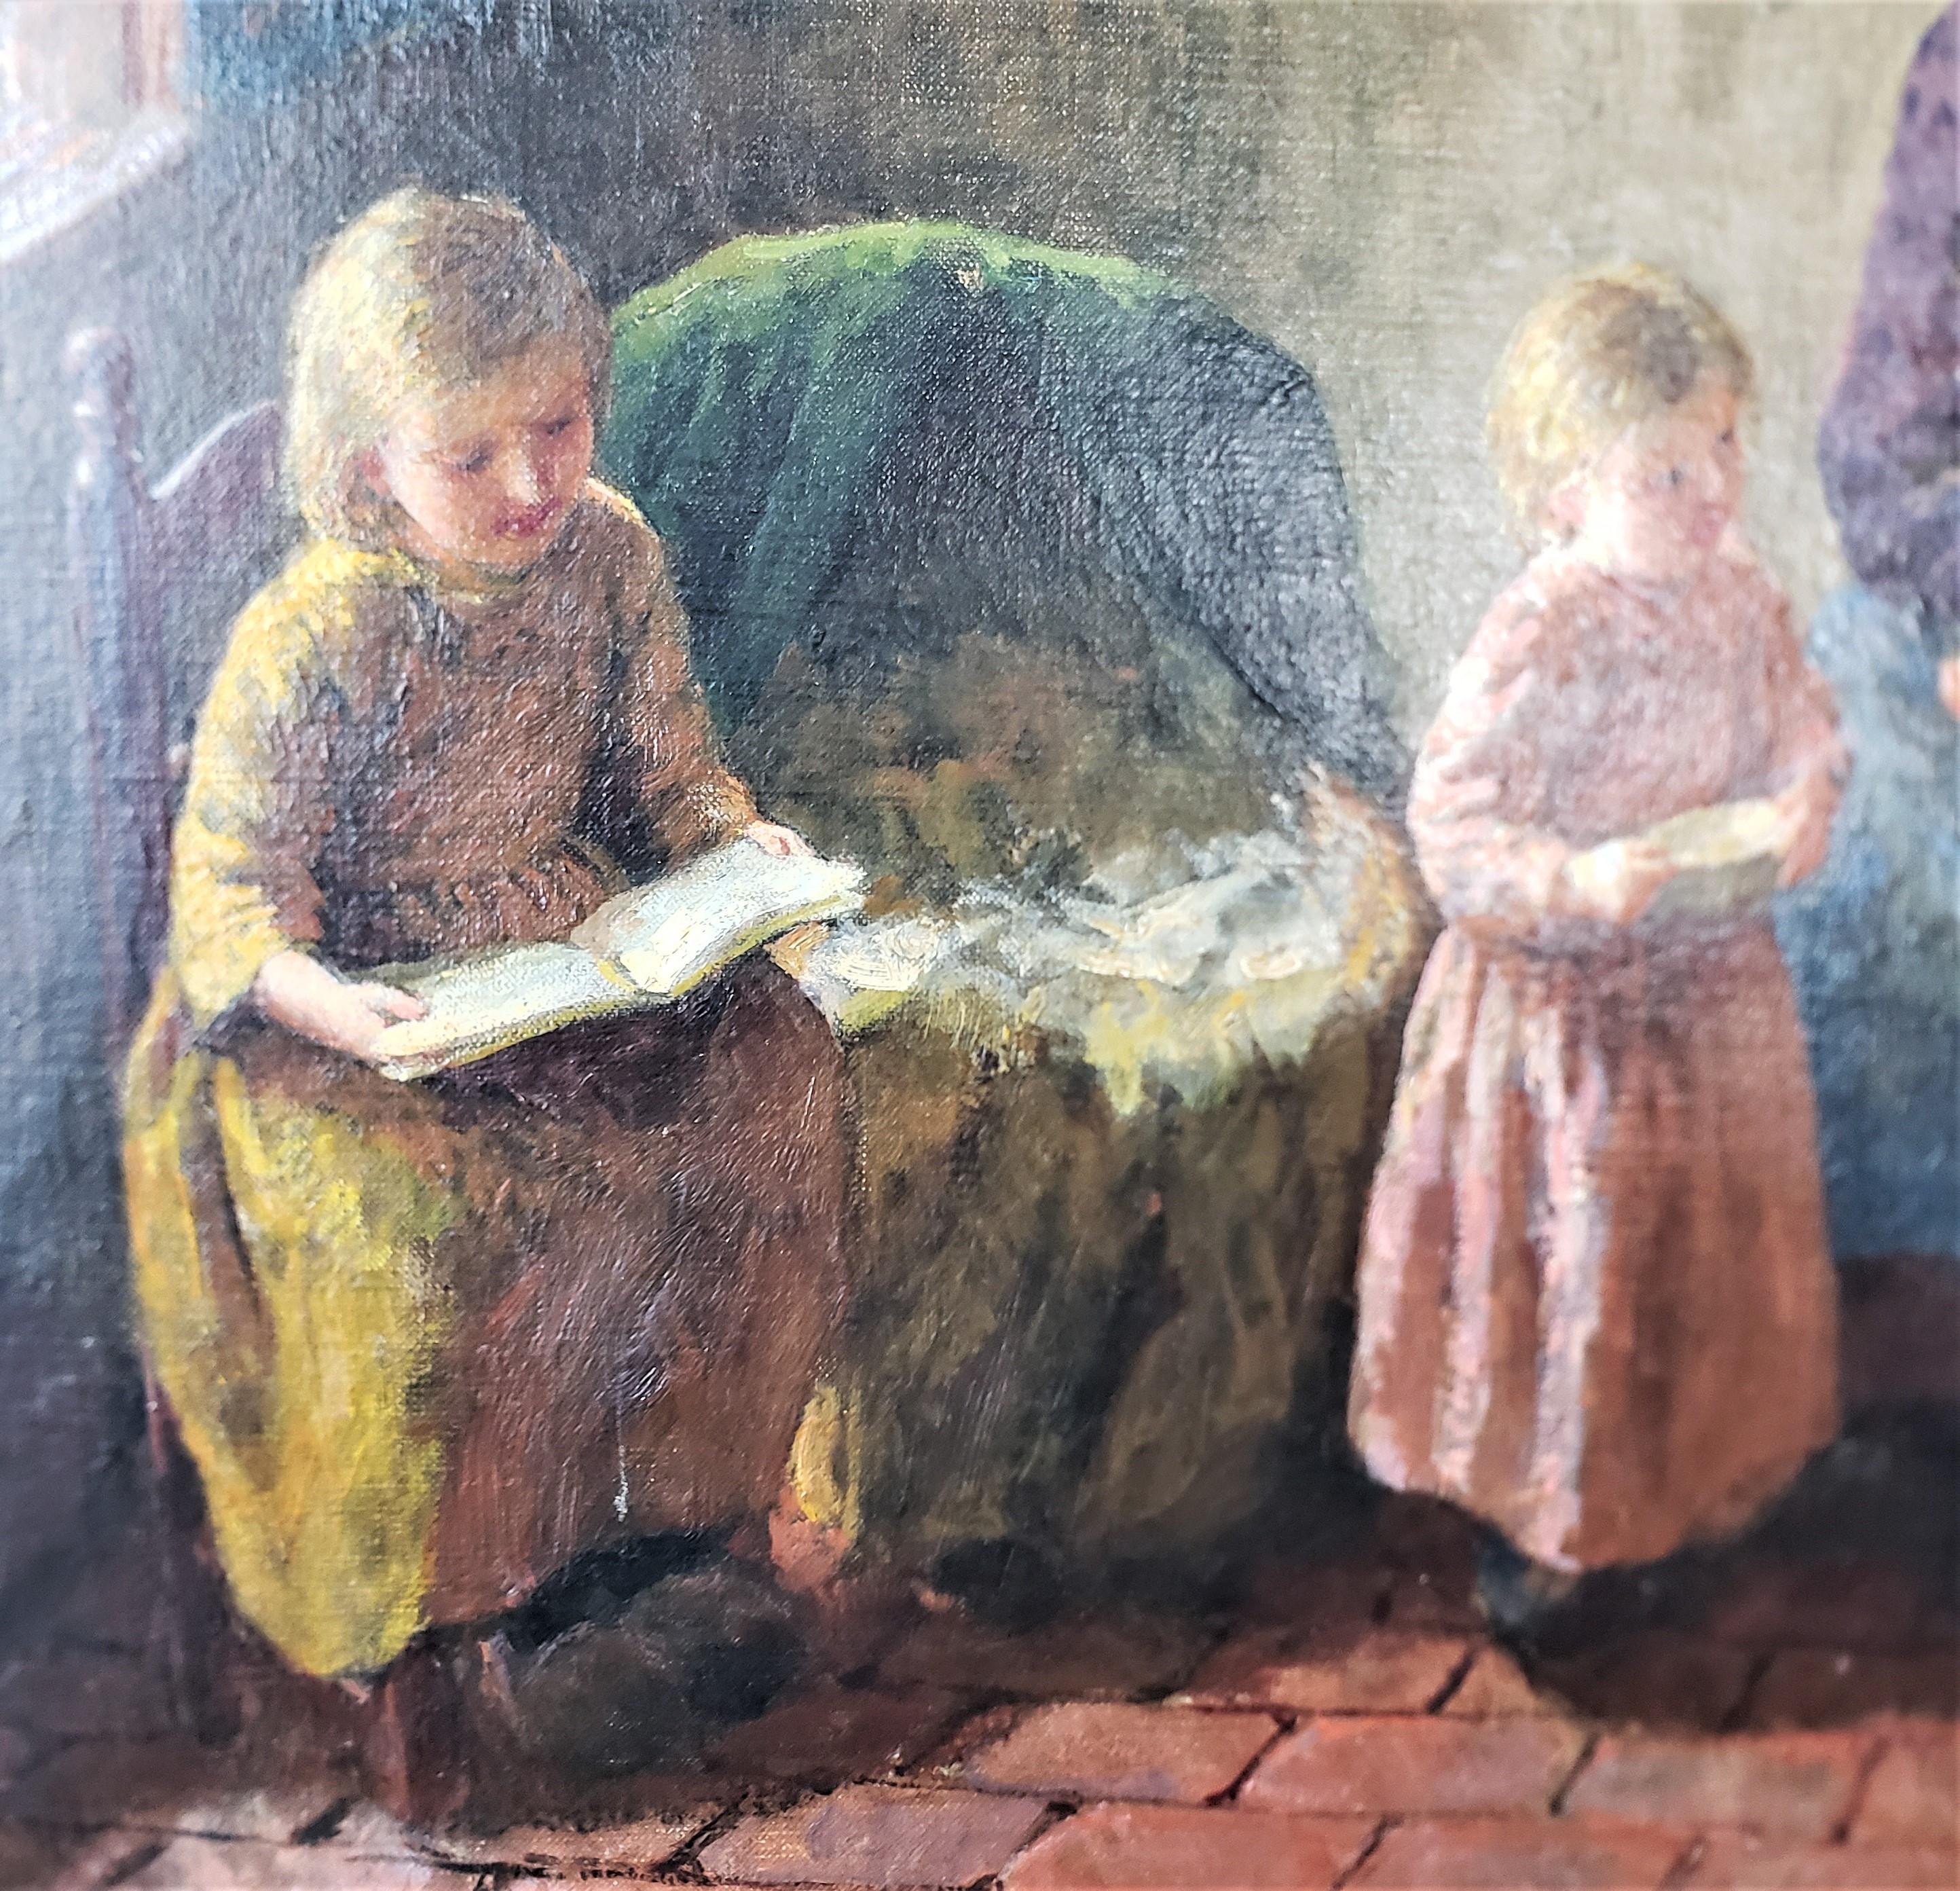 Bernard Pothast Antique Original Oil Painting on Canvas of a Mother & Children In Good Condition For Sale In Hamilton, Ontario